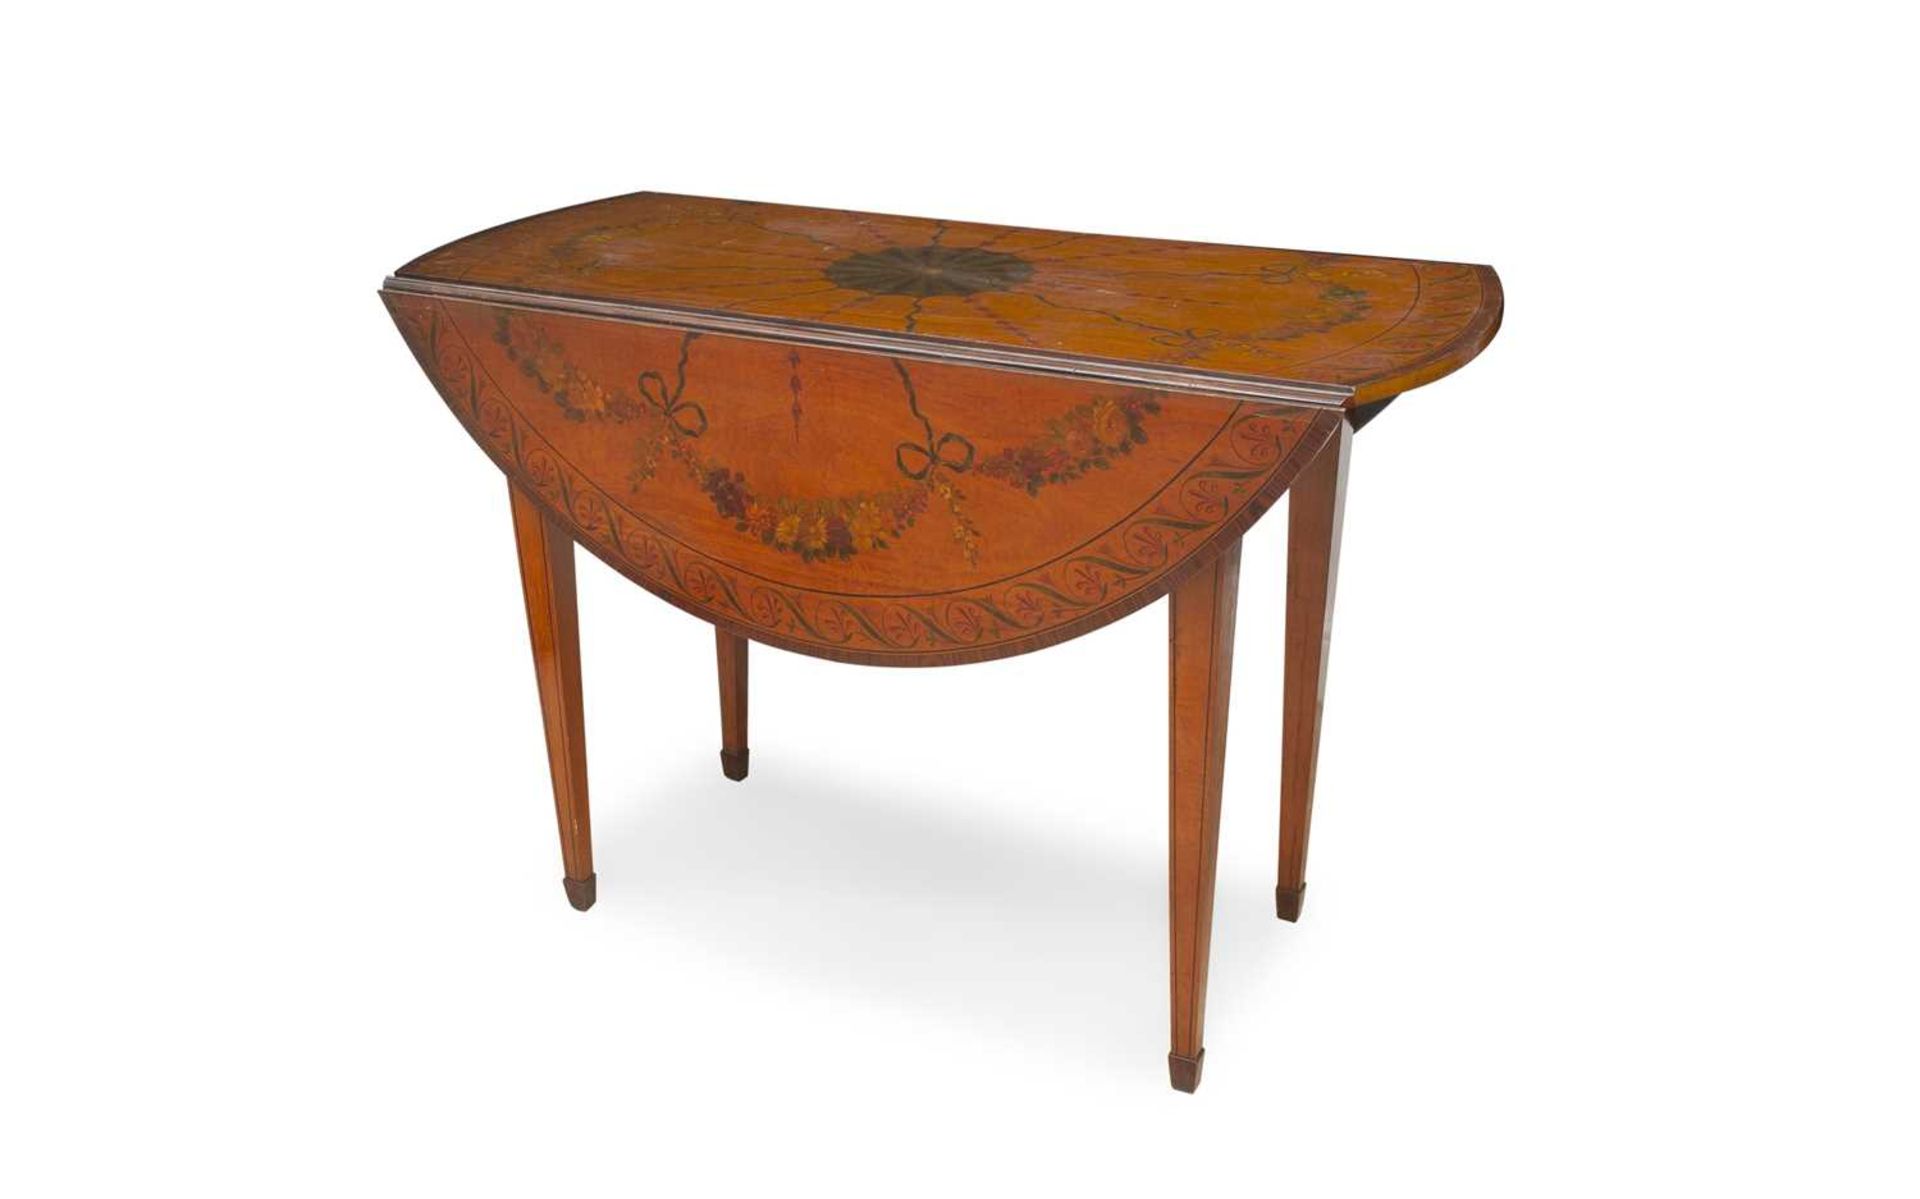 A 19TH CENTURY SHERATON STYLE PAINTED SATINWOOD DROP LEAF TABLE - Image 2 of 2